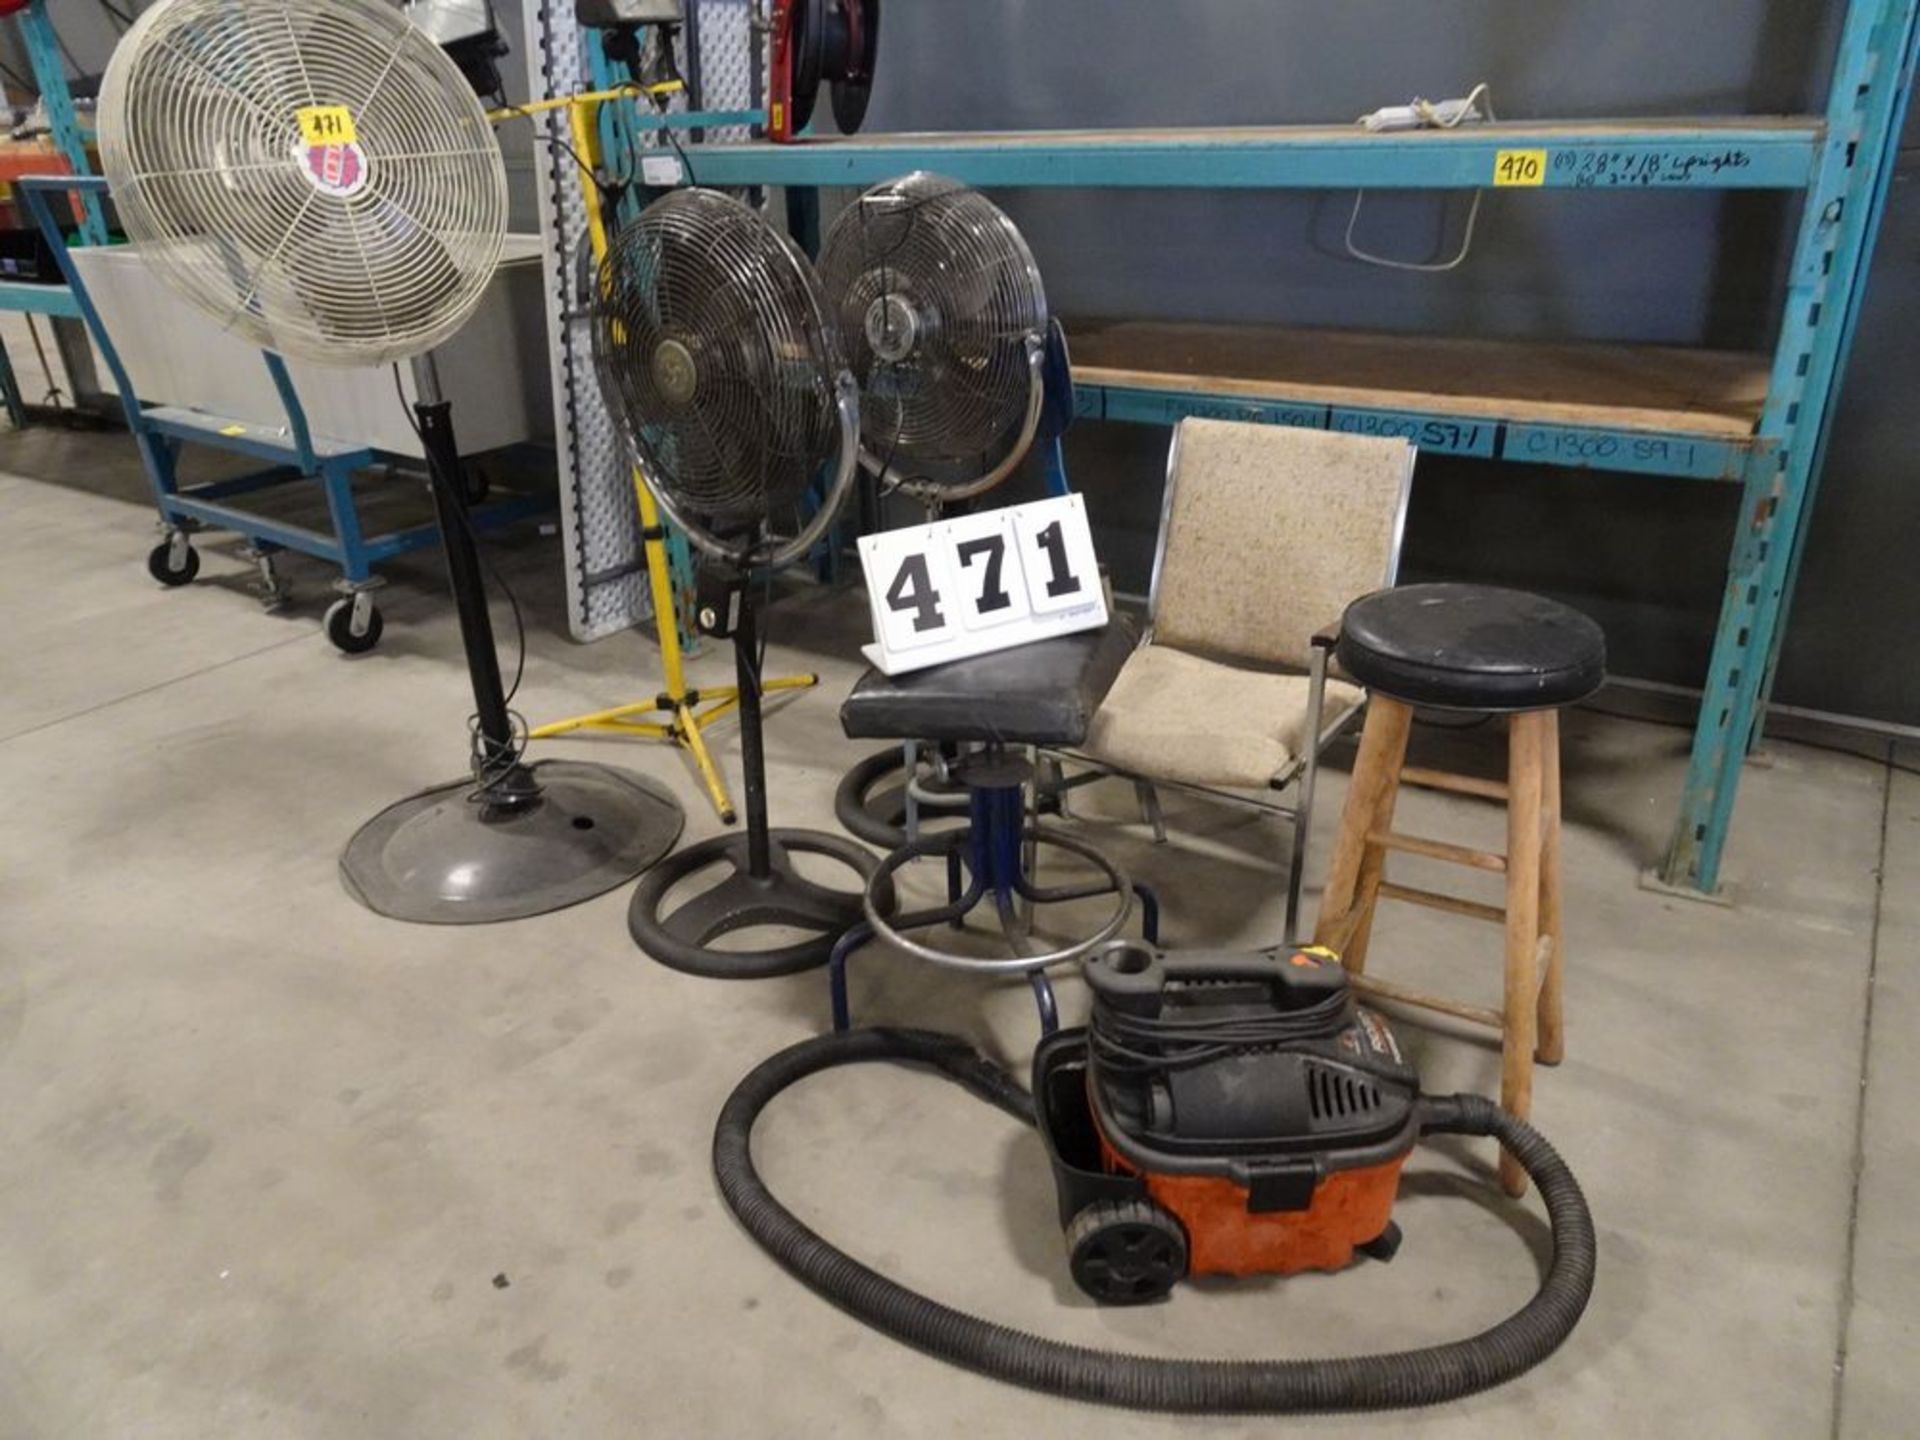 LOT OF 3 FLOOR FANS, STOOLS AND VACUUM